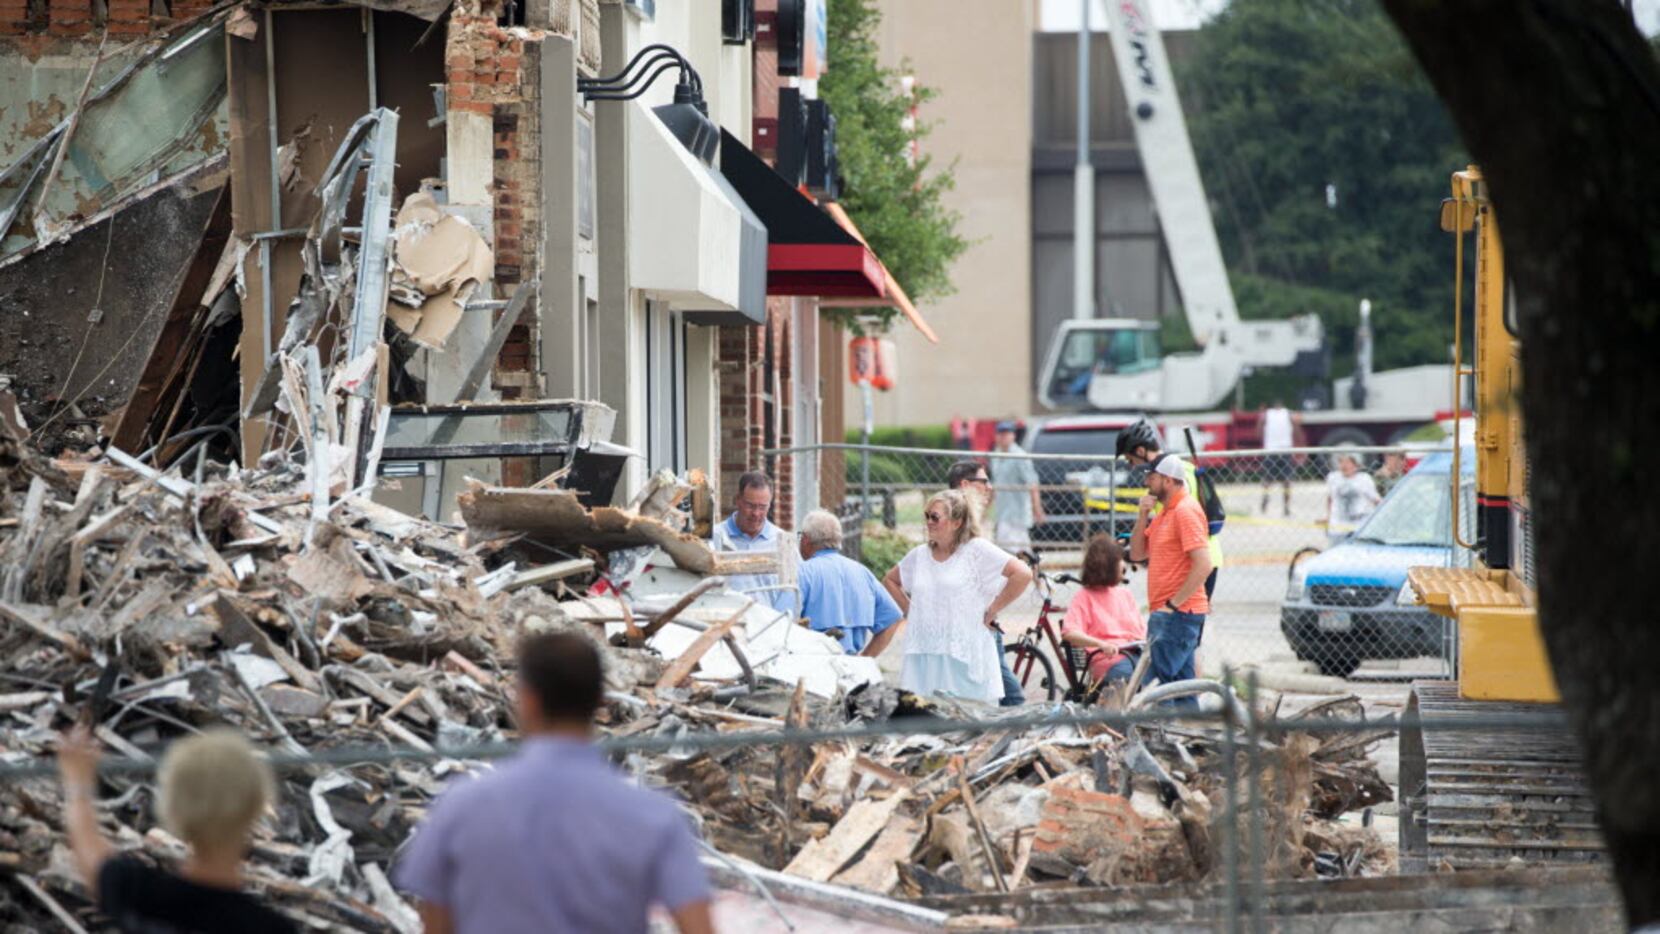 The owners of Goff's Hamburgers surveyed the remains after the restaurant was demolished...